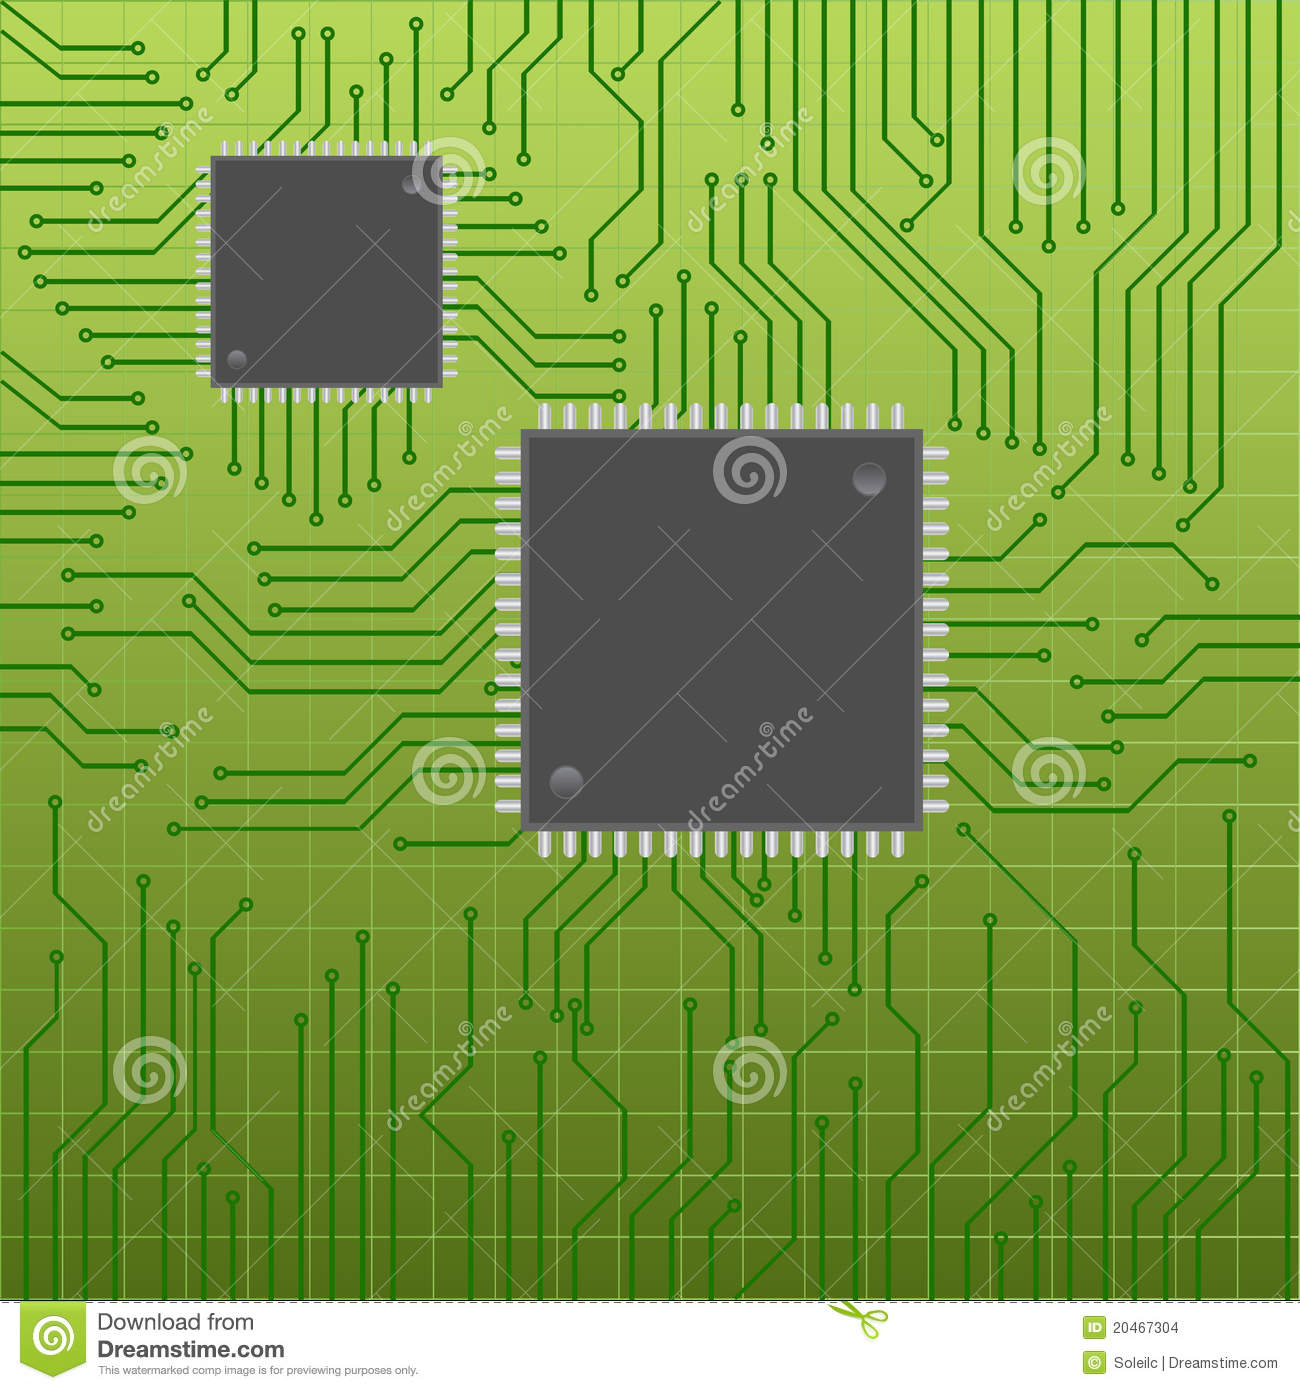 Circuit Board With Chips Stock Images   Image  20467304